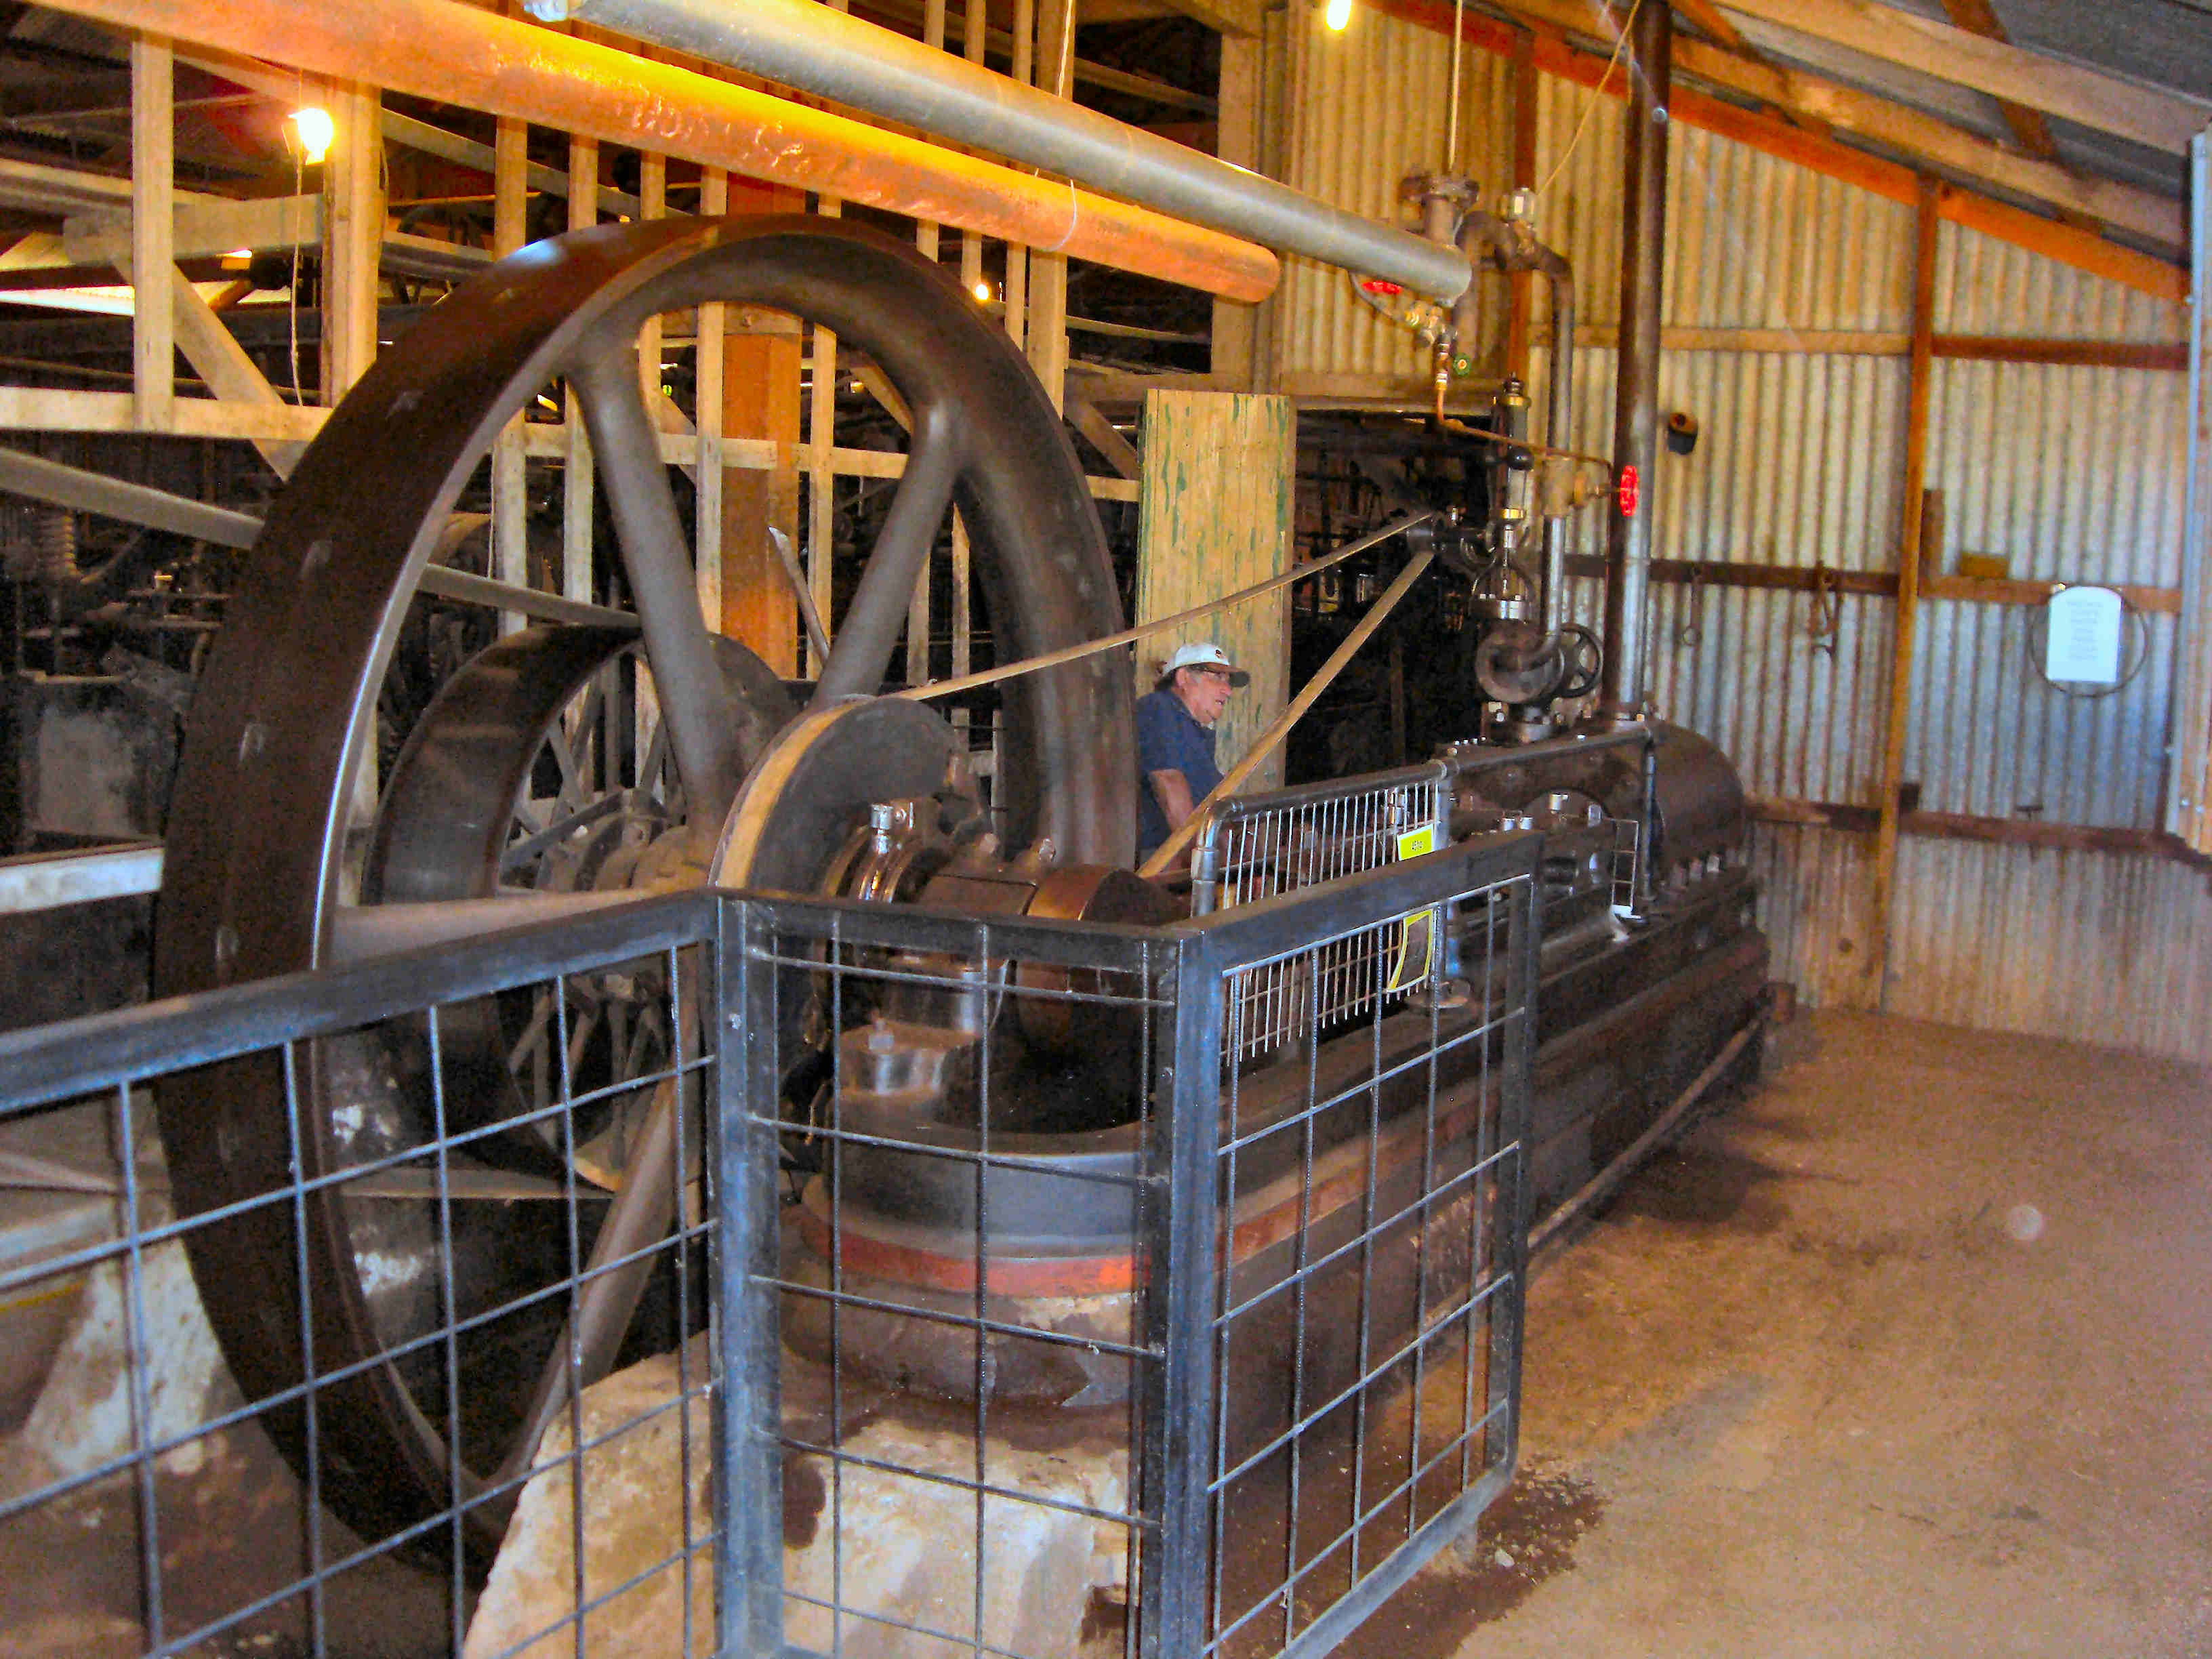 The steam engine that drove all the machinery